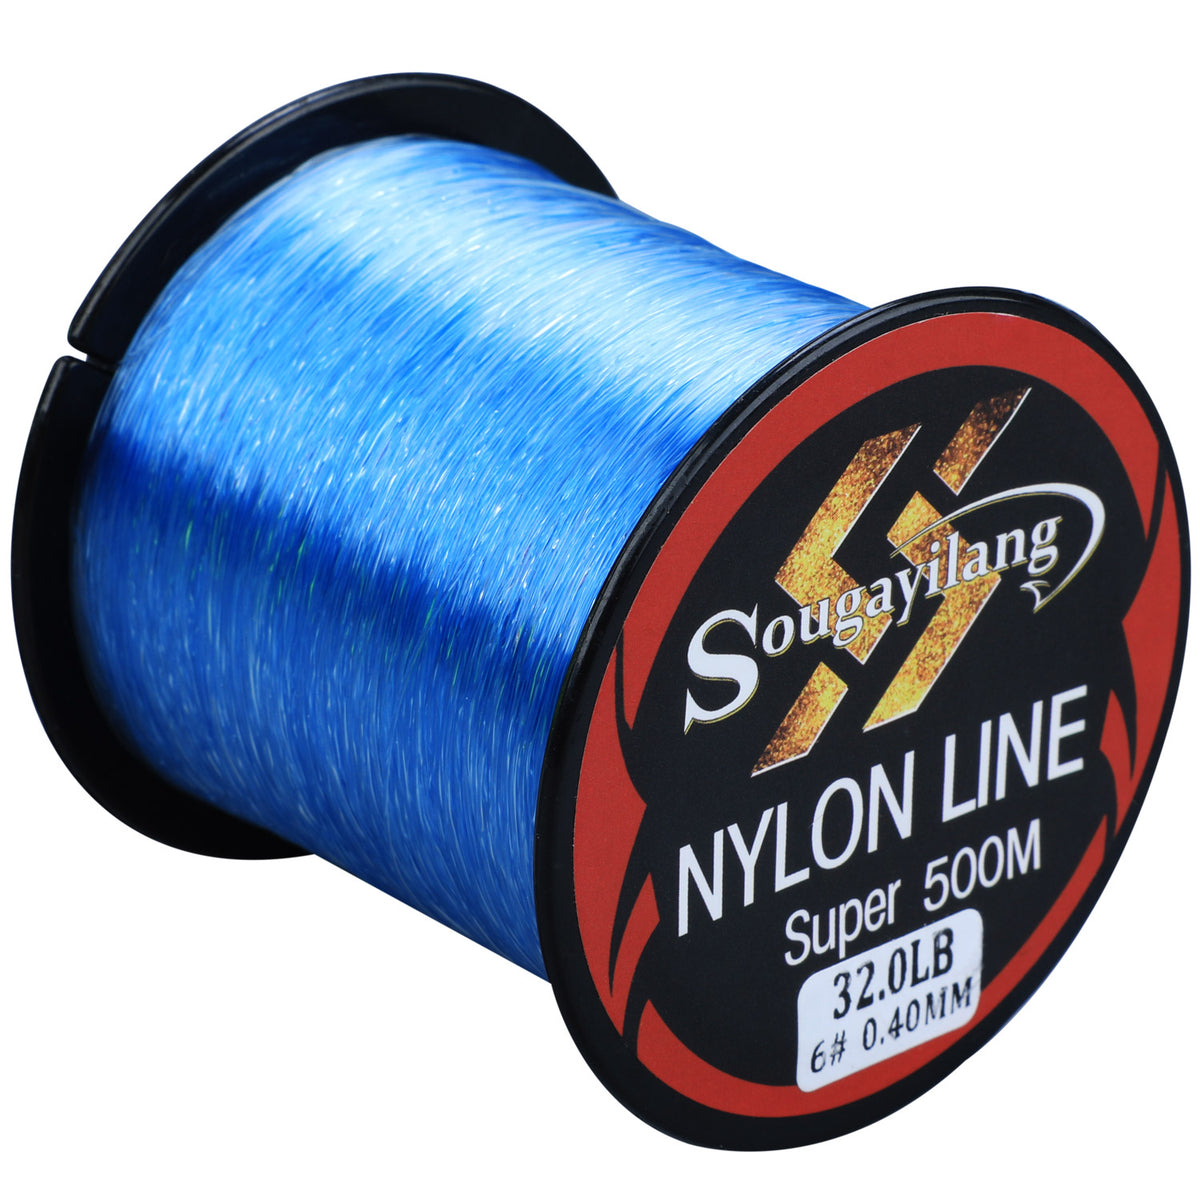 100m Clear Nylon Outdoor Fishing String Thread 1mm Dia. Boat/Cast